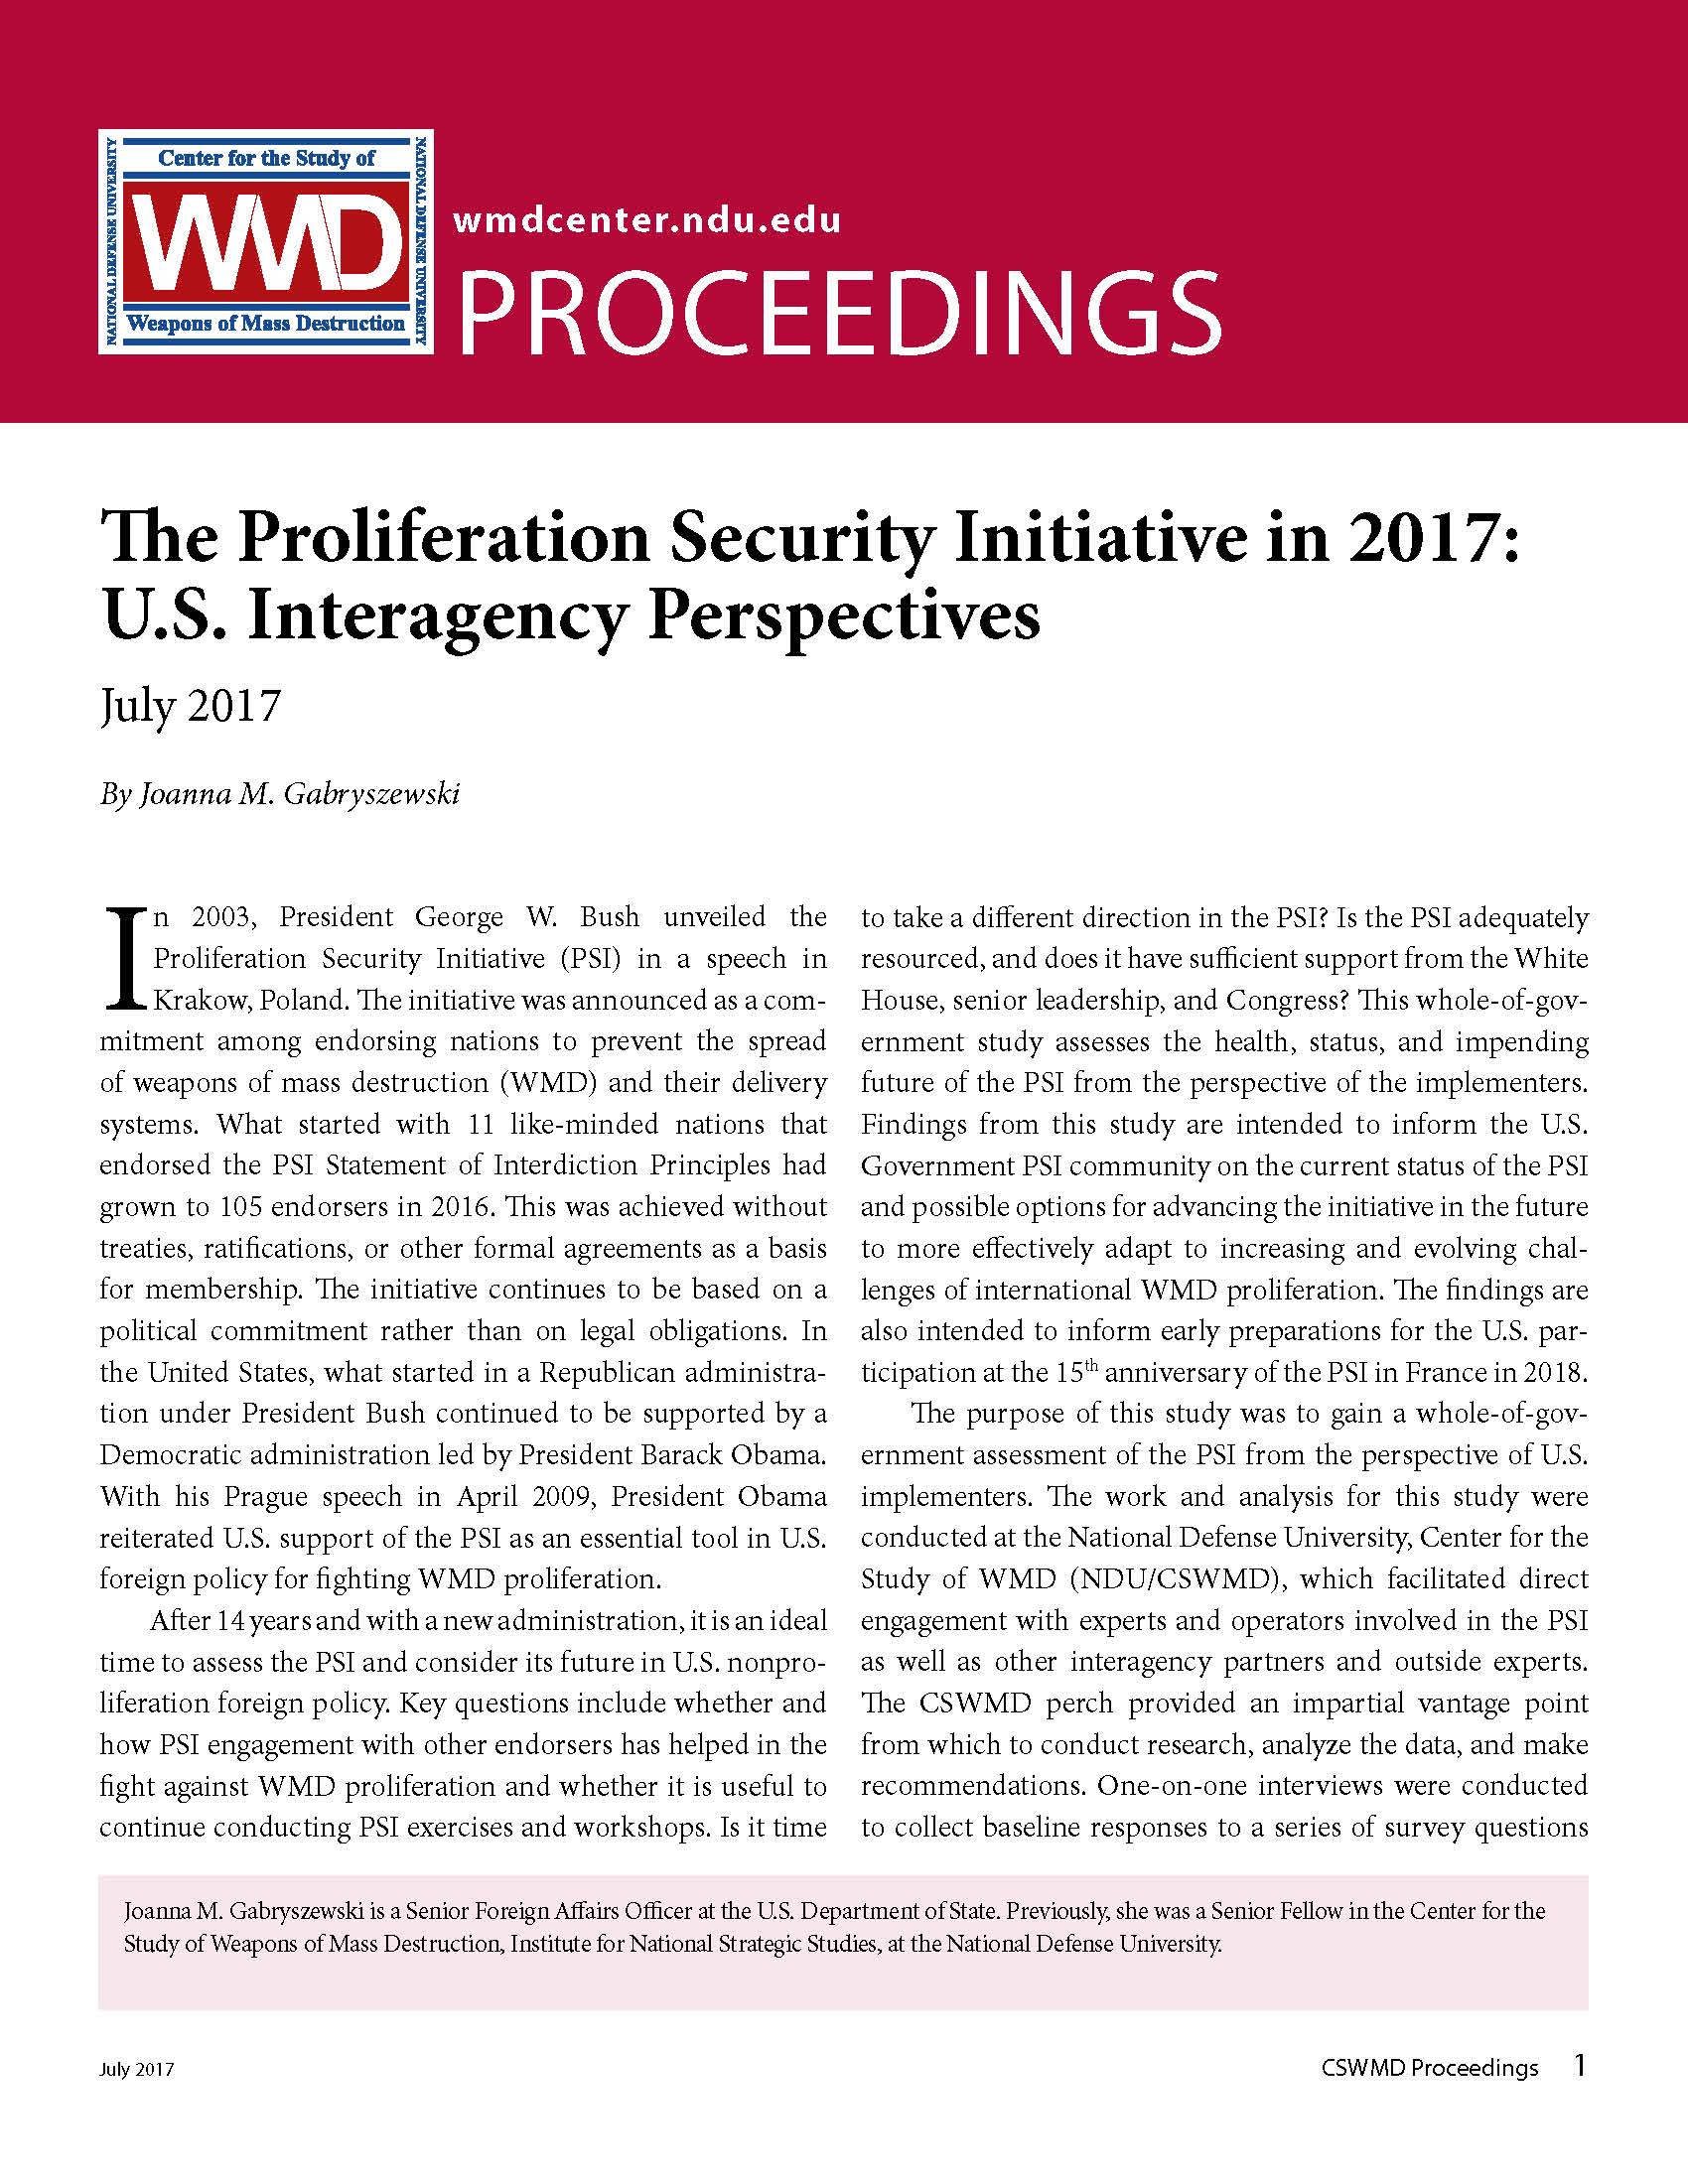 The Proliferation Security Initiative in 2017